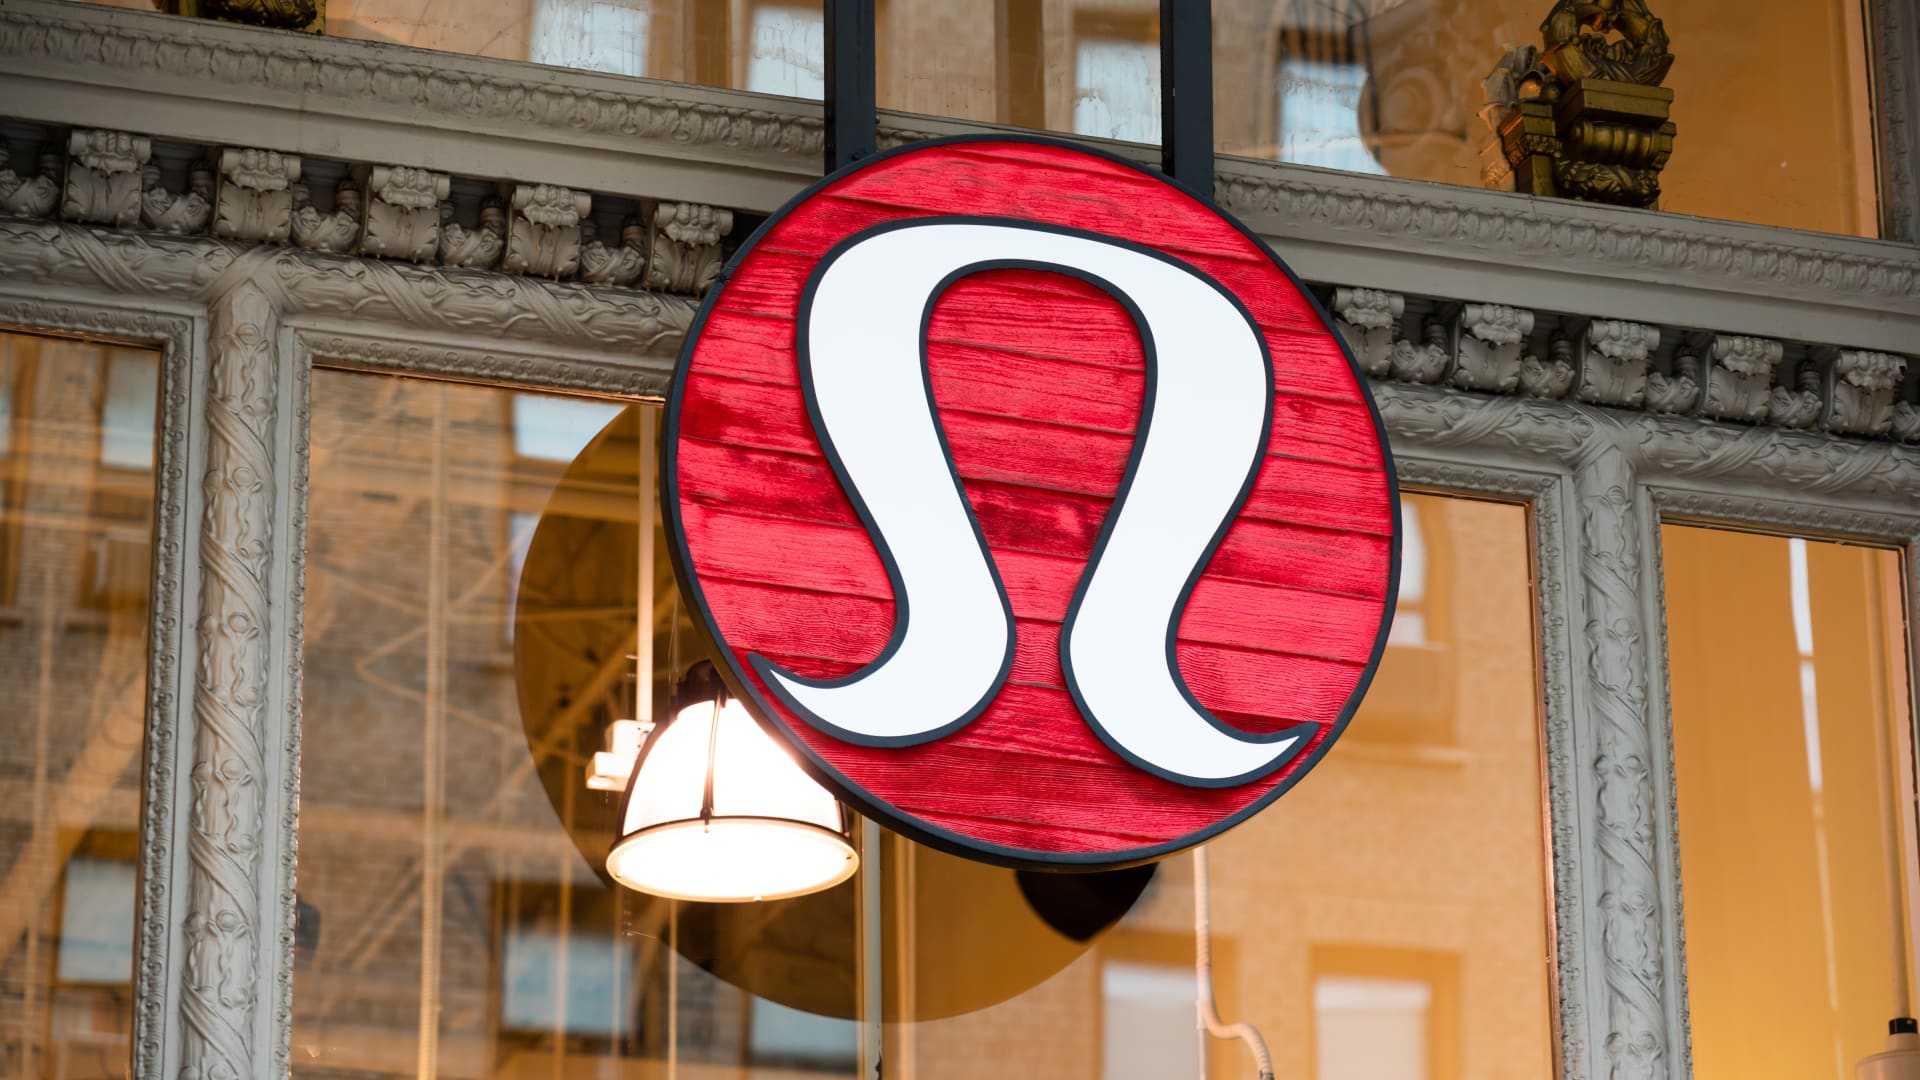 Lululemon trade-in, resell program to launch this month